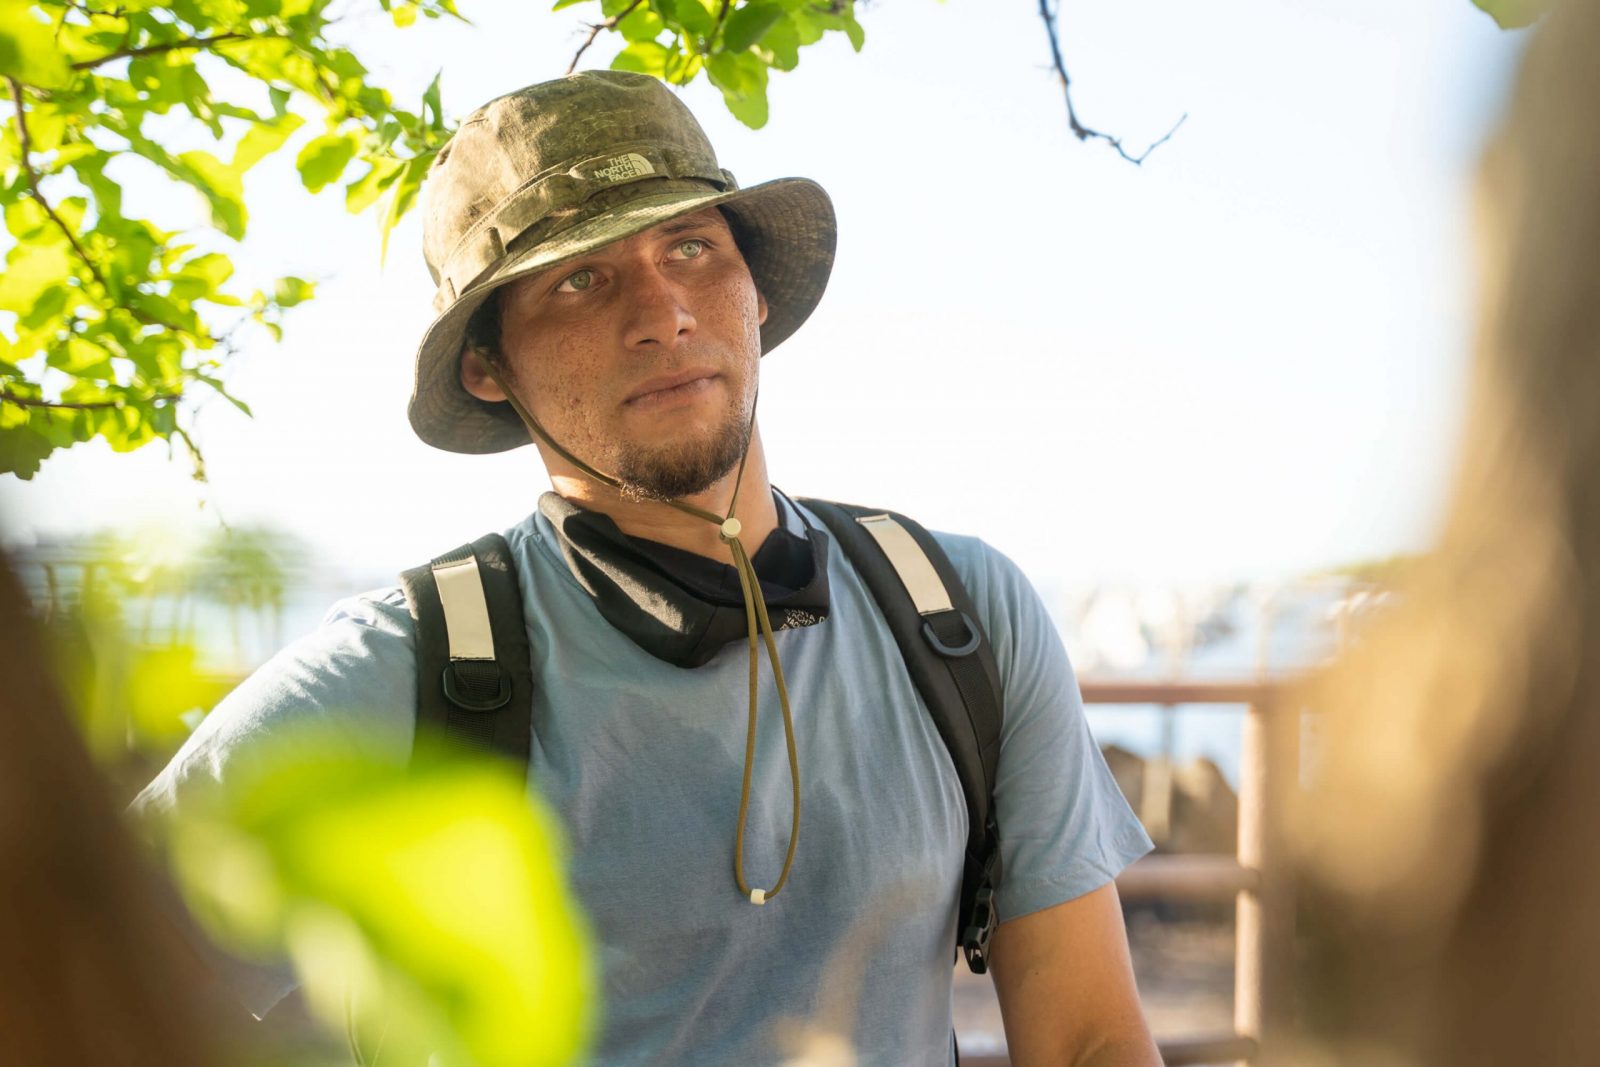 Jaison, wearing a green bucket hat, blue t-shirt, and backpack gazes at a tourist with his green eyes.